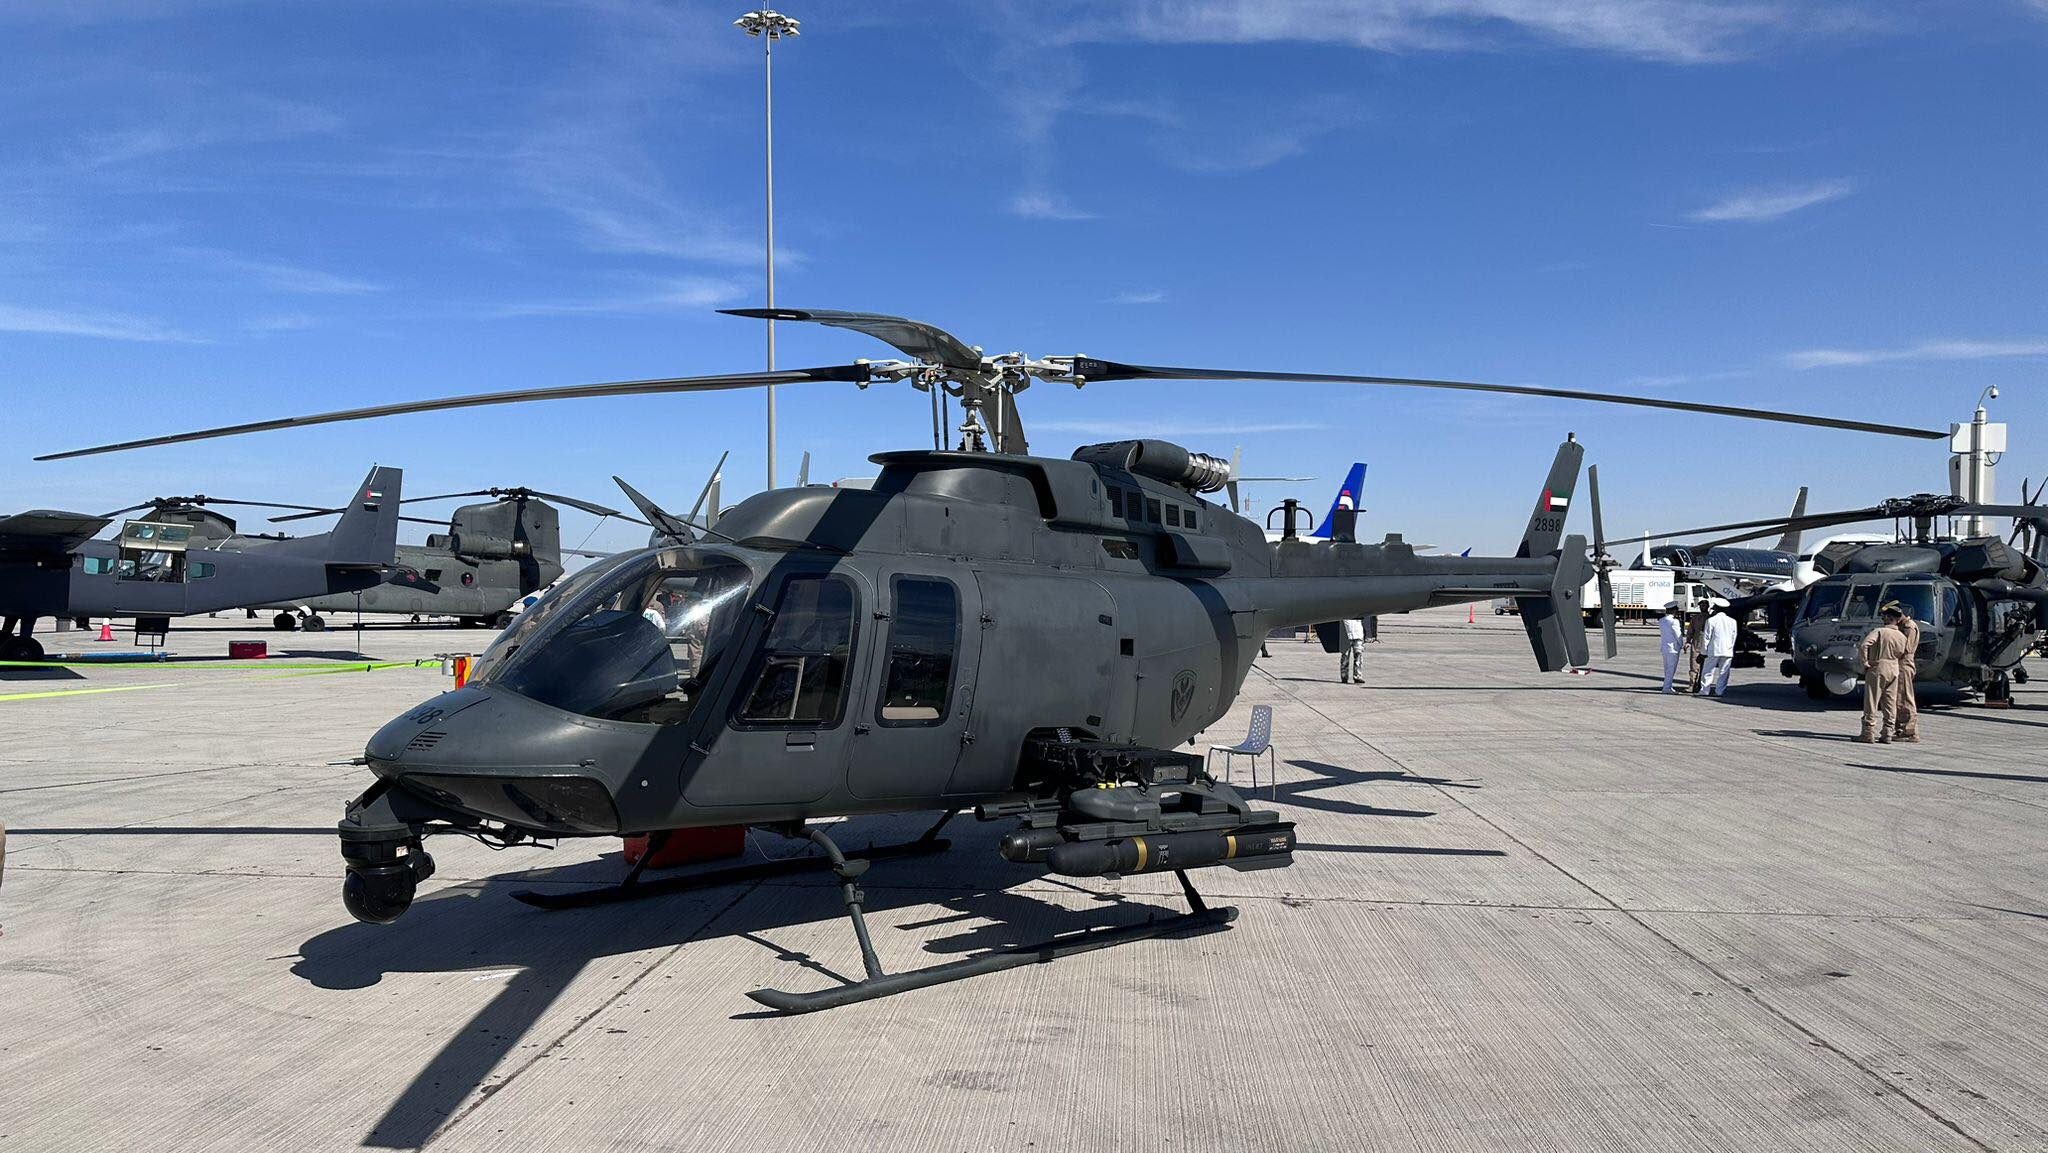 As Bell Textron delivers helos to Jordan, firm inks another Middle East deal for militarized birds